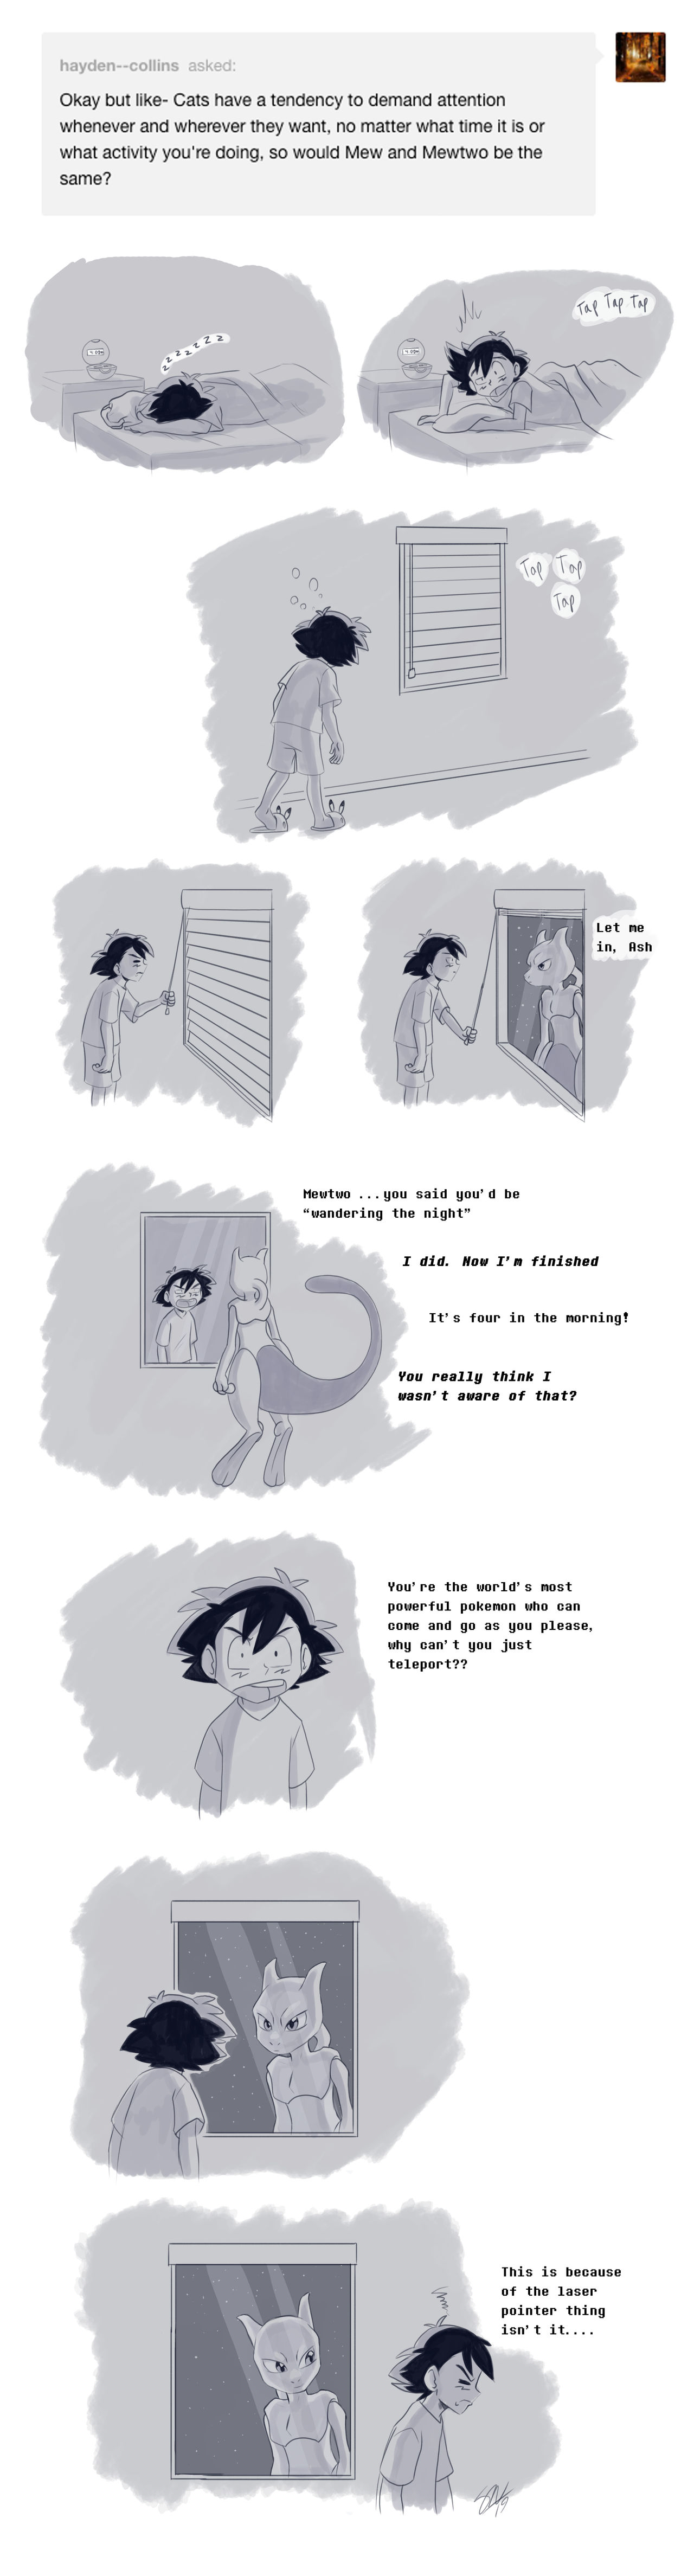 Mew & Mewtwo by TC-96 ☆ SERIES SO FAR ☆ [Comic Drama Year Compilation] 